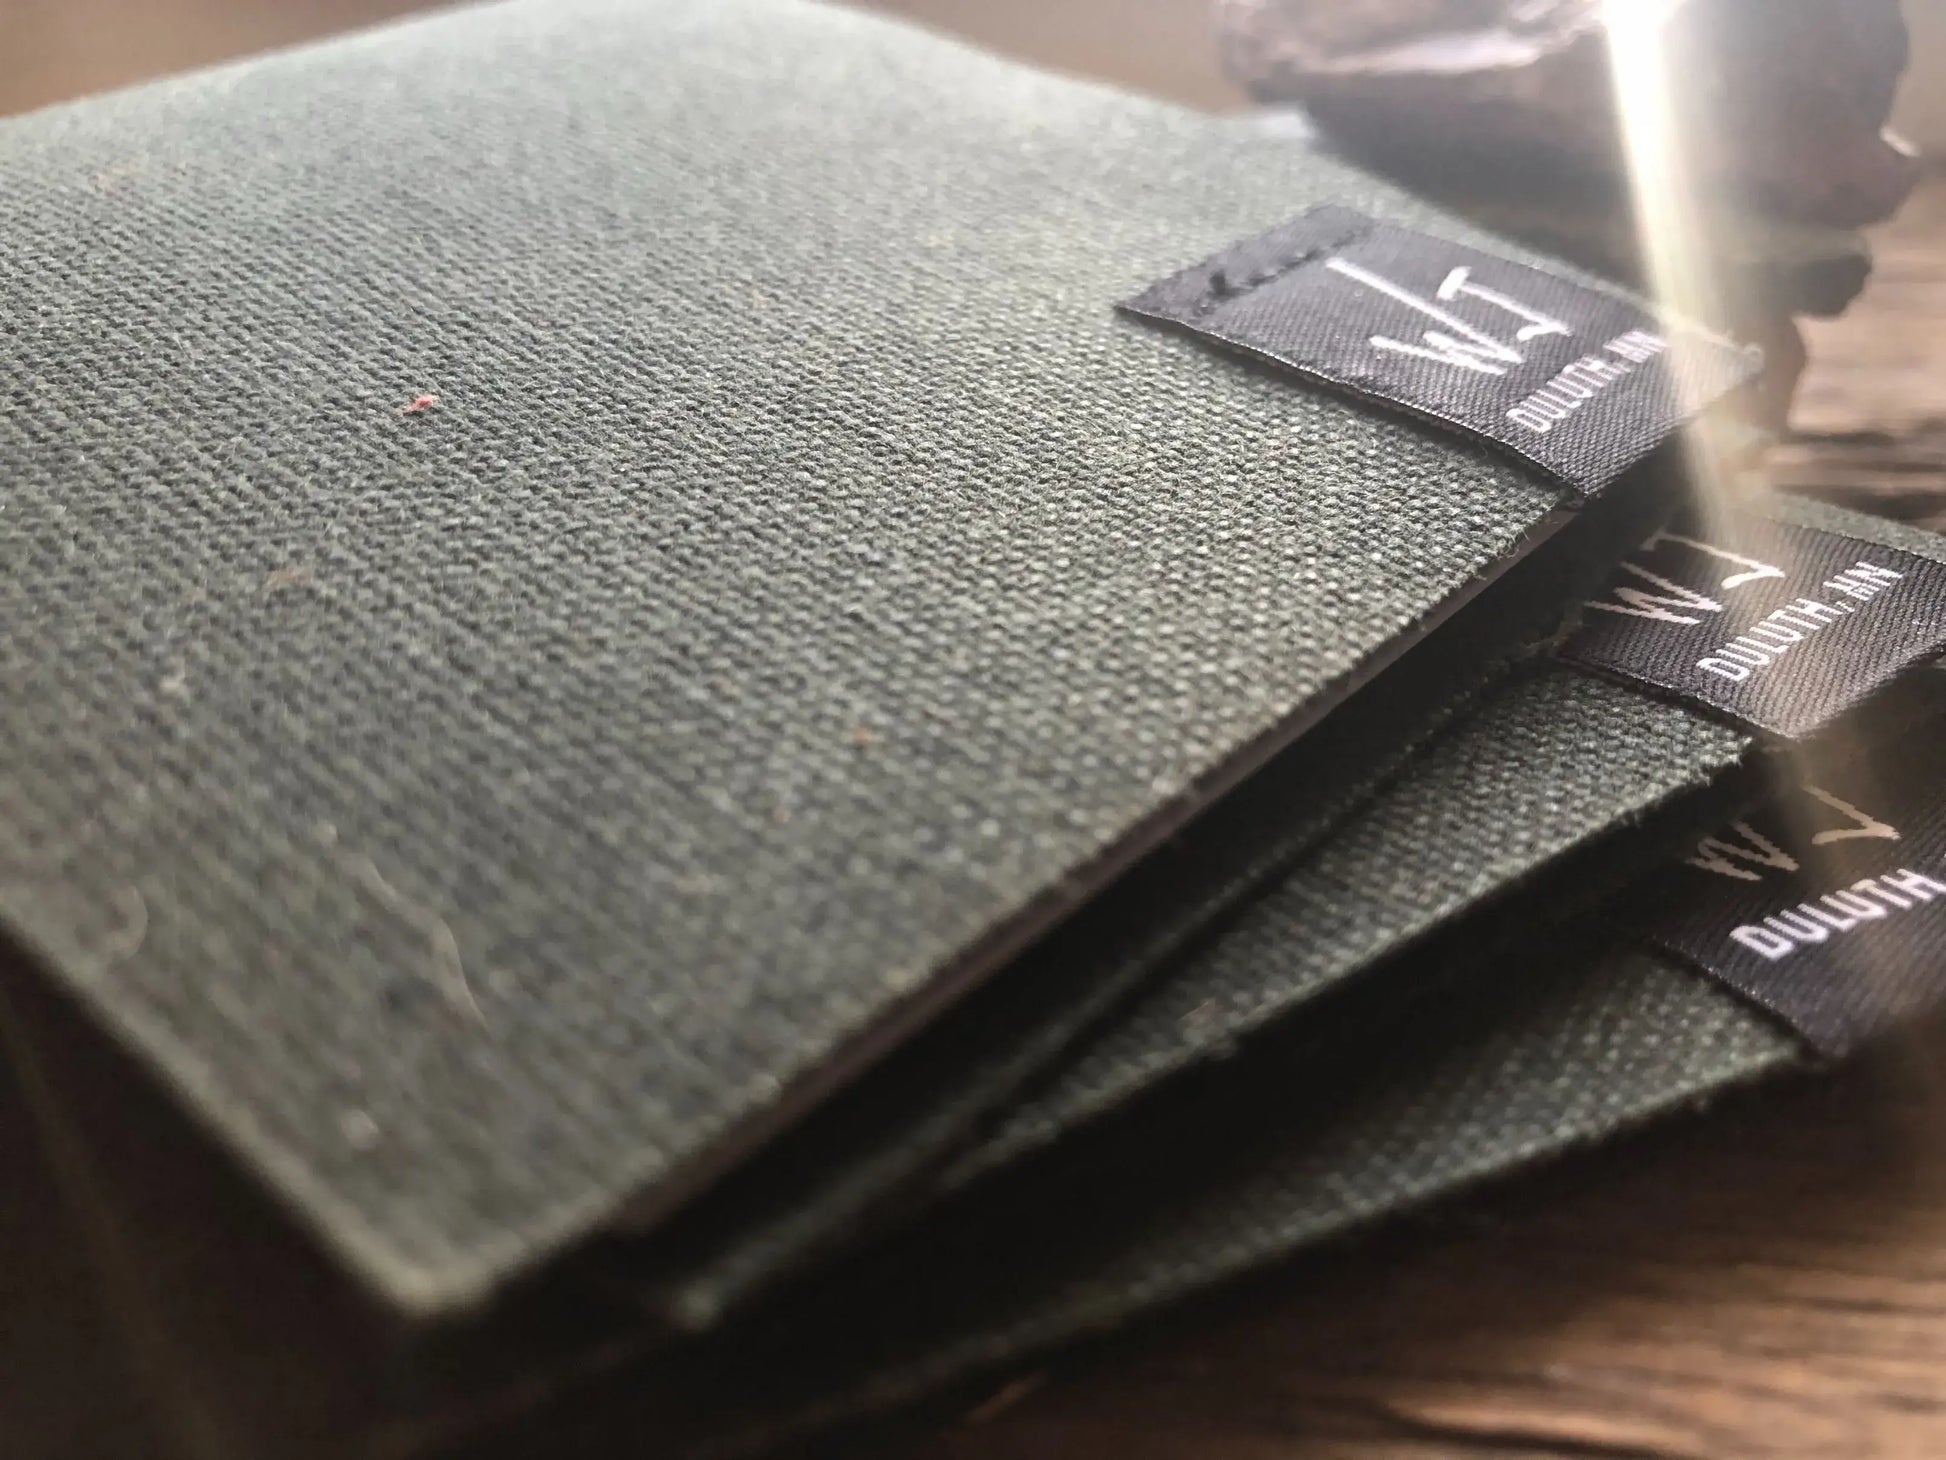 Stack of gray notebooks.